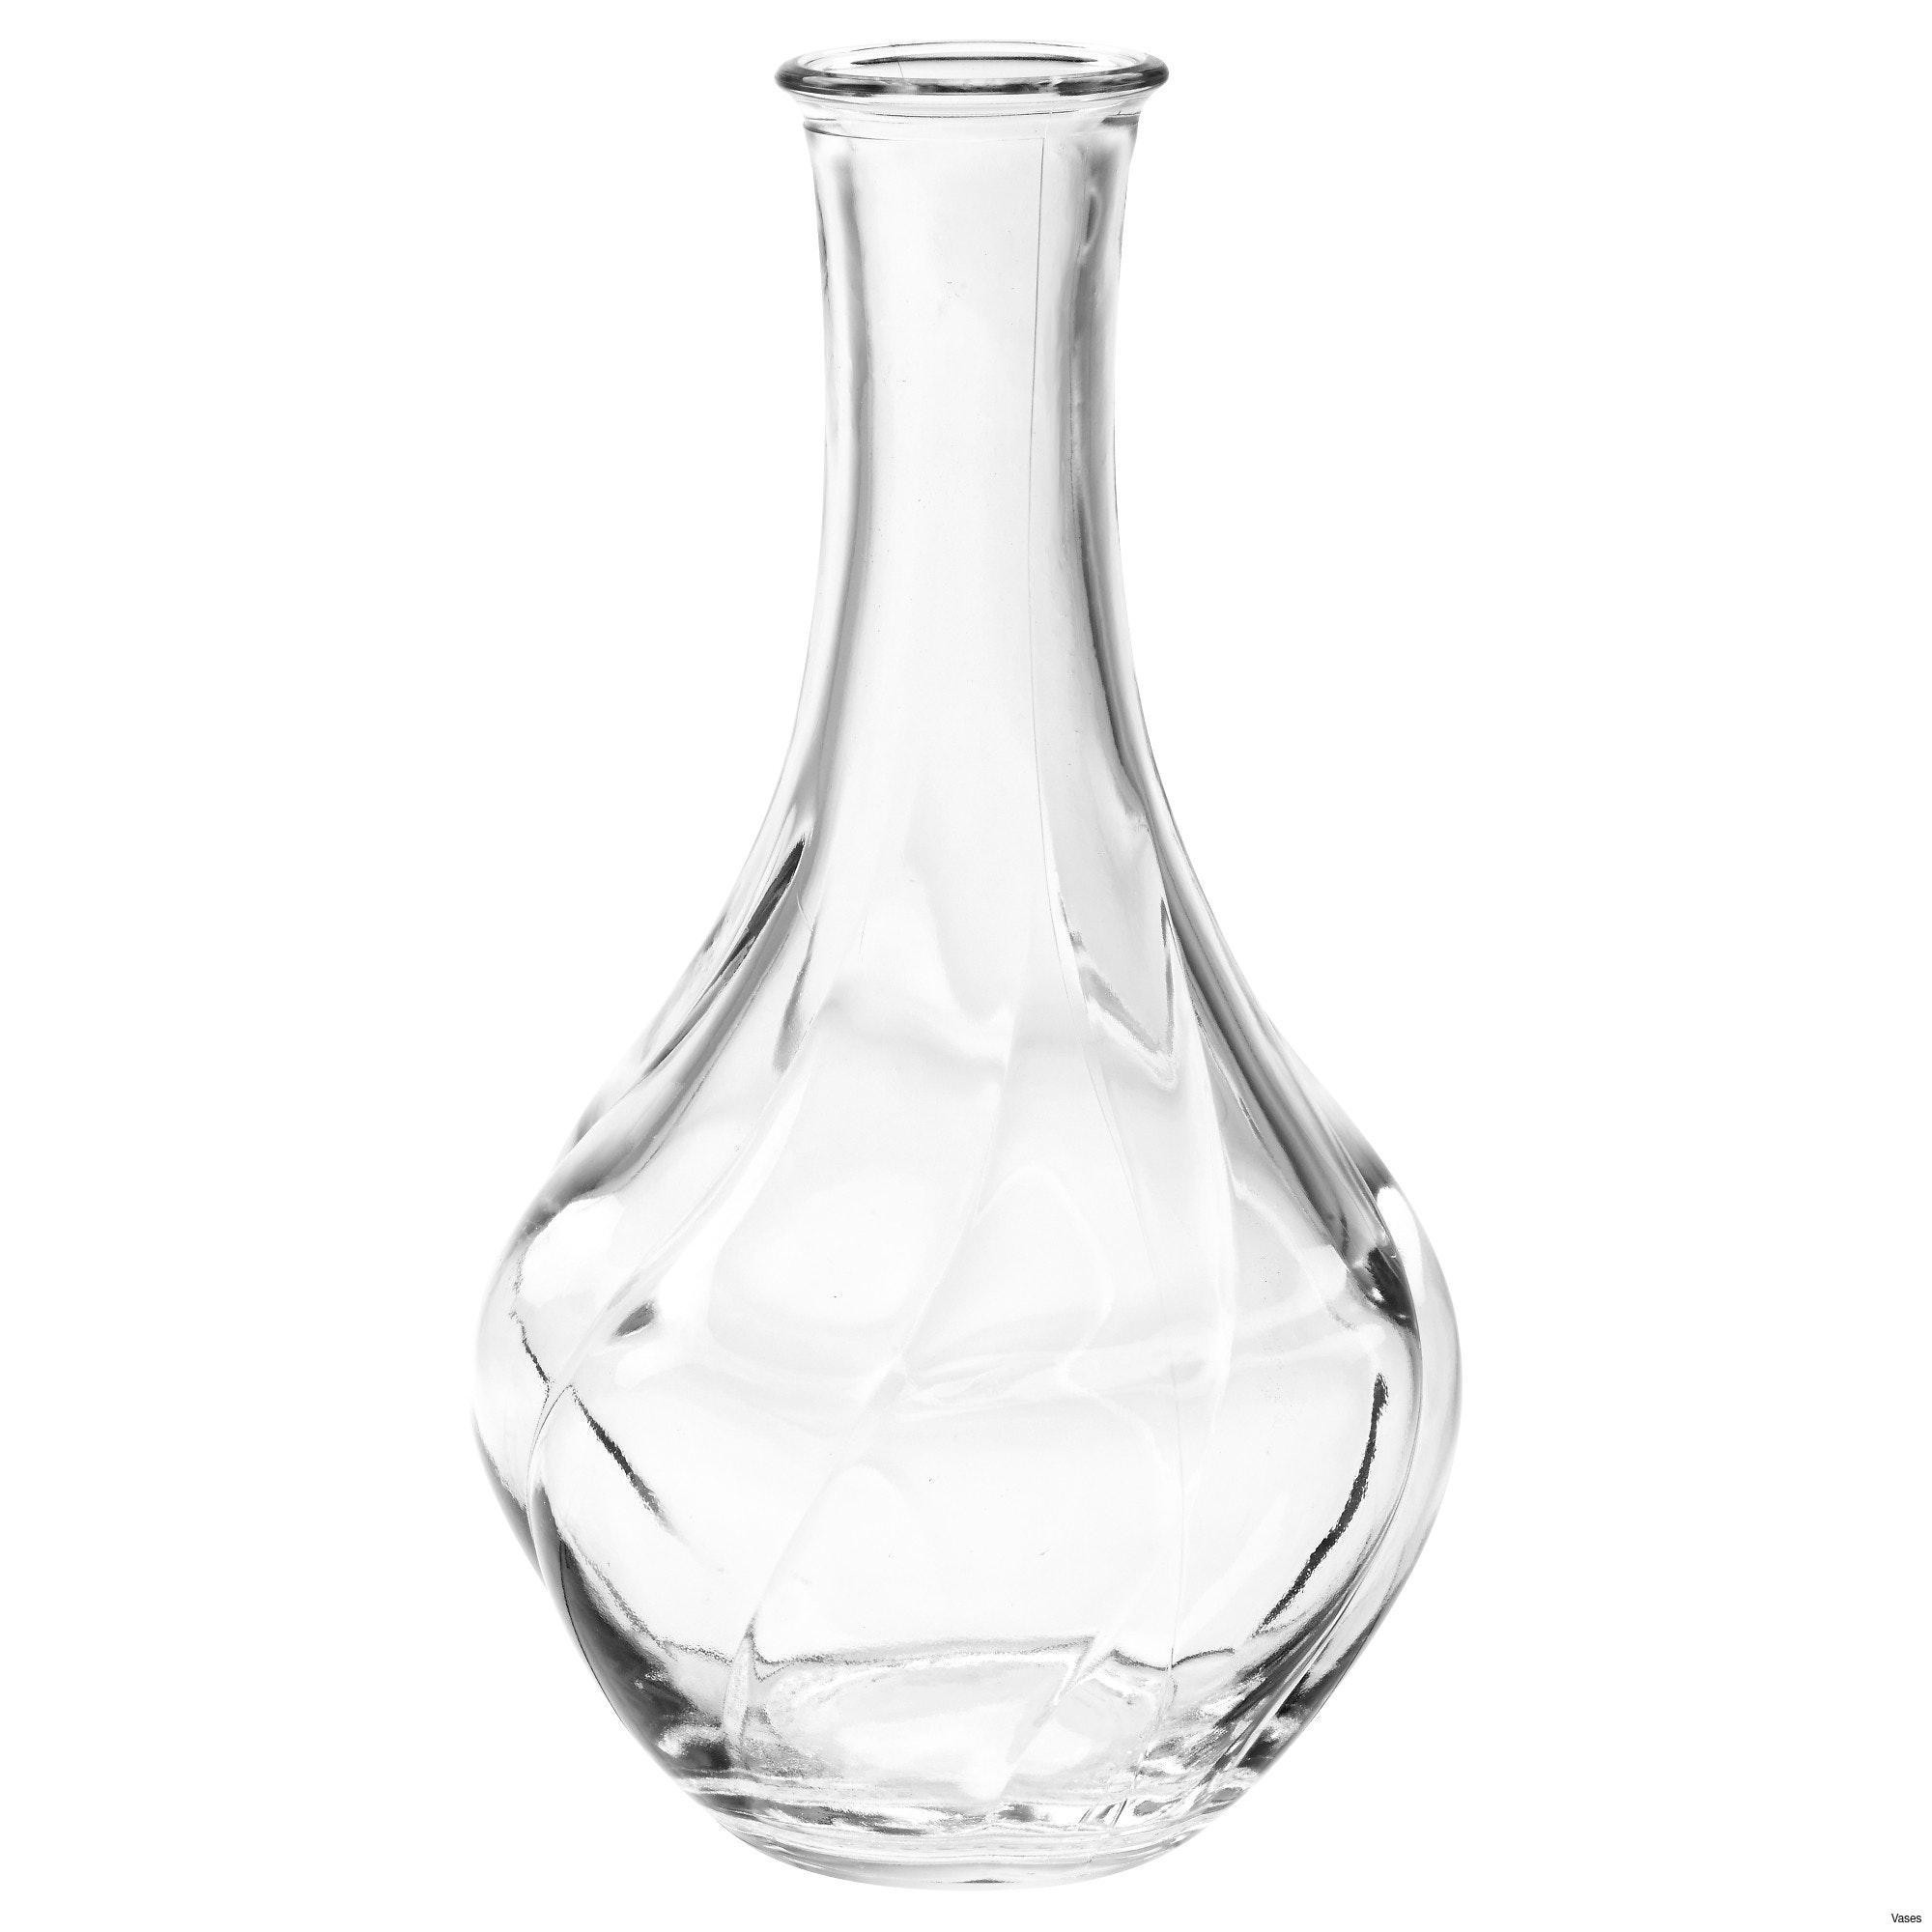 24 Best Black and White Decorative Vases 2024 free download black and white decorative vases of glass vases with lids image living room glass vases fresh clear vase in glass vases with lids image living room glass vases fresh clear vase 0d tags amazi